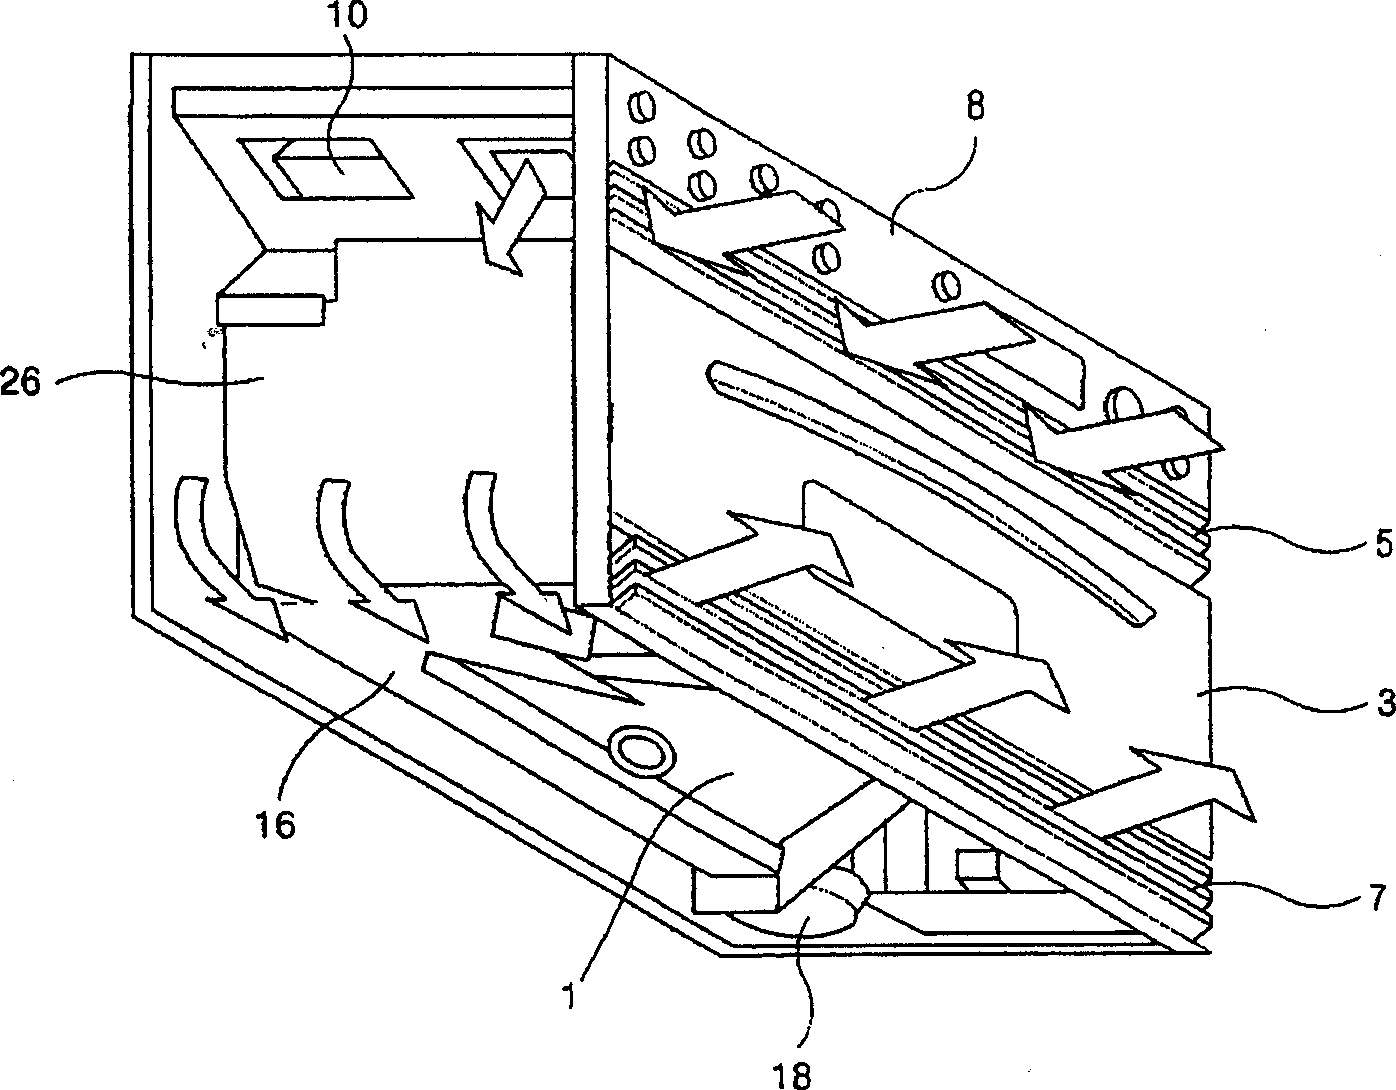 Air flow system for microwave oven